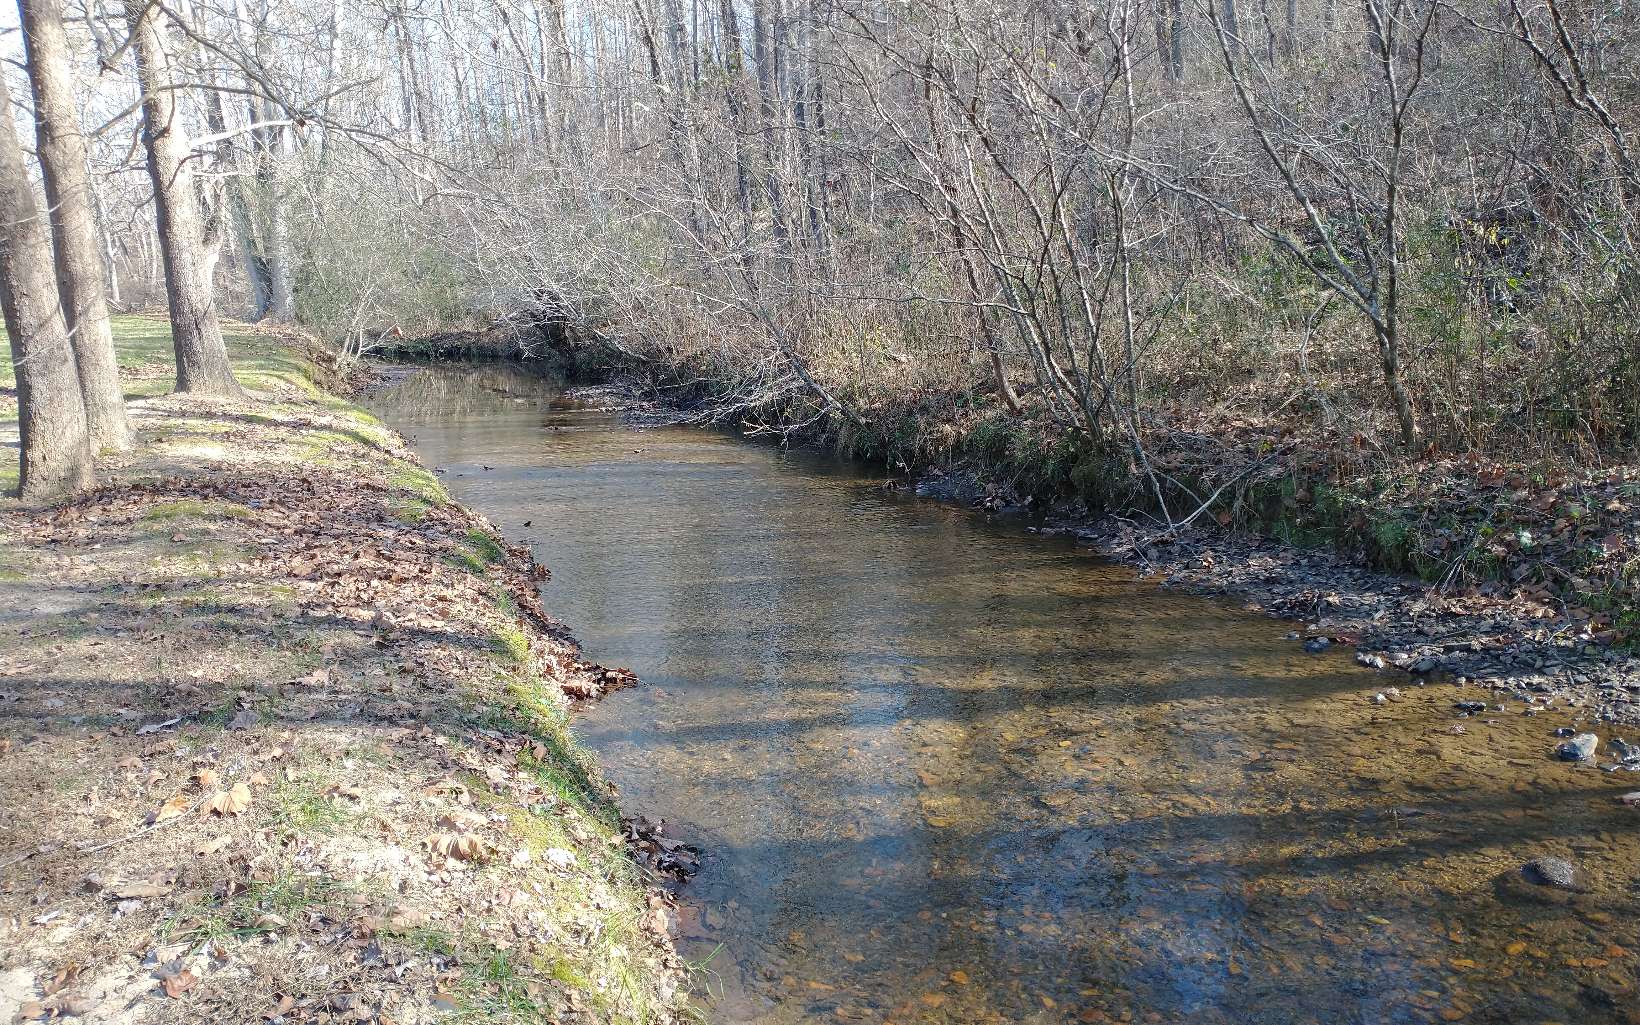 Beautiful laying 1.137 acres on fast flowing Trout Stream (Bell Creek). Very light restrictions and no HOA fees. Only minutes from Downtown Hiawassee. This is the best opportunity to own Creekfront property, 155' of it !!! Don't let this one get away from you.